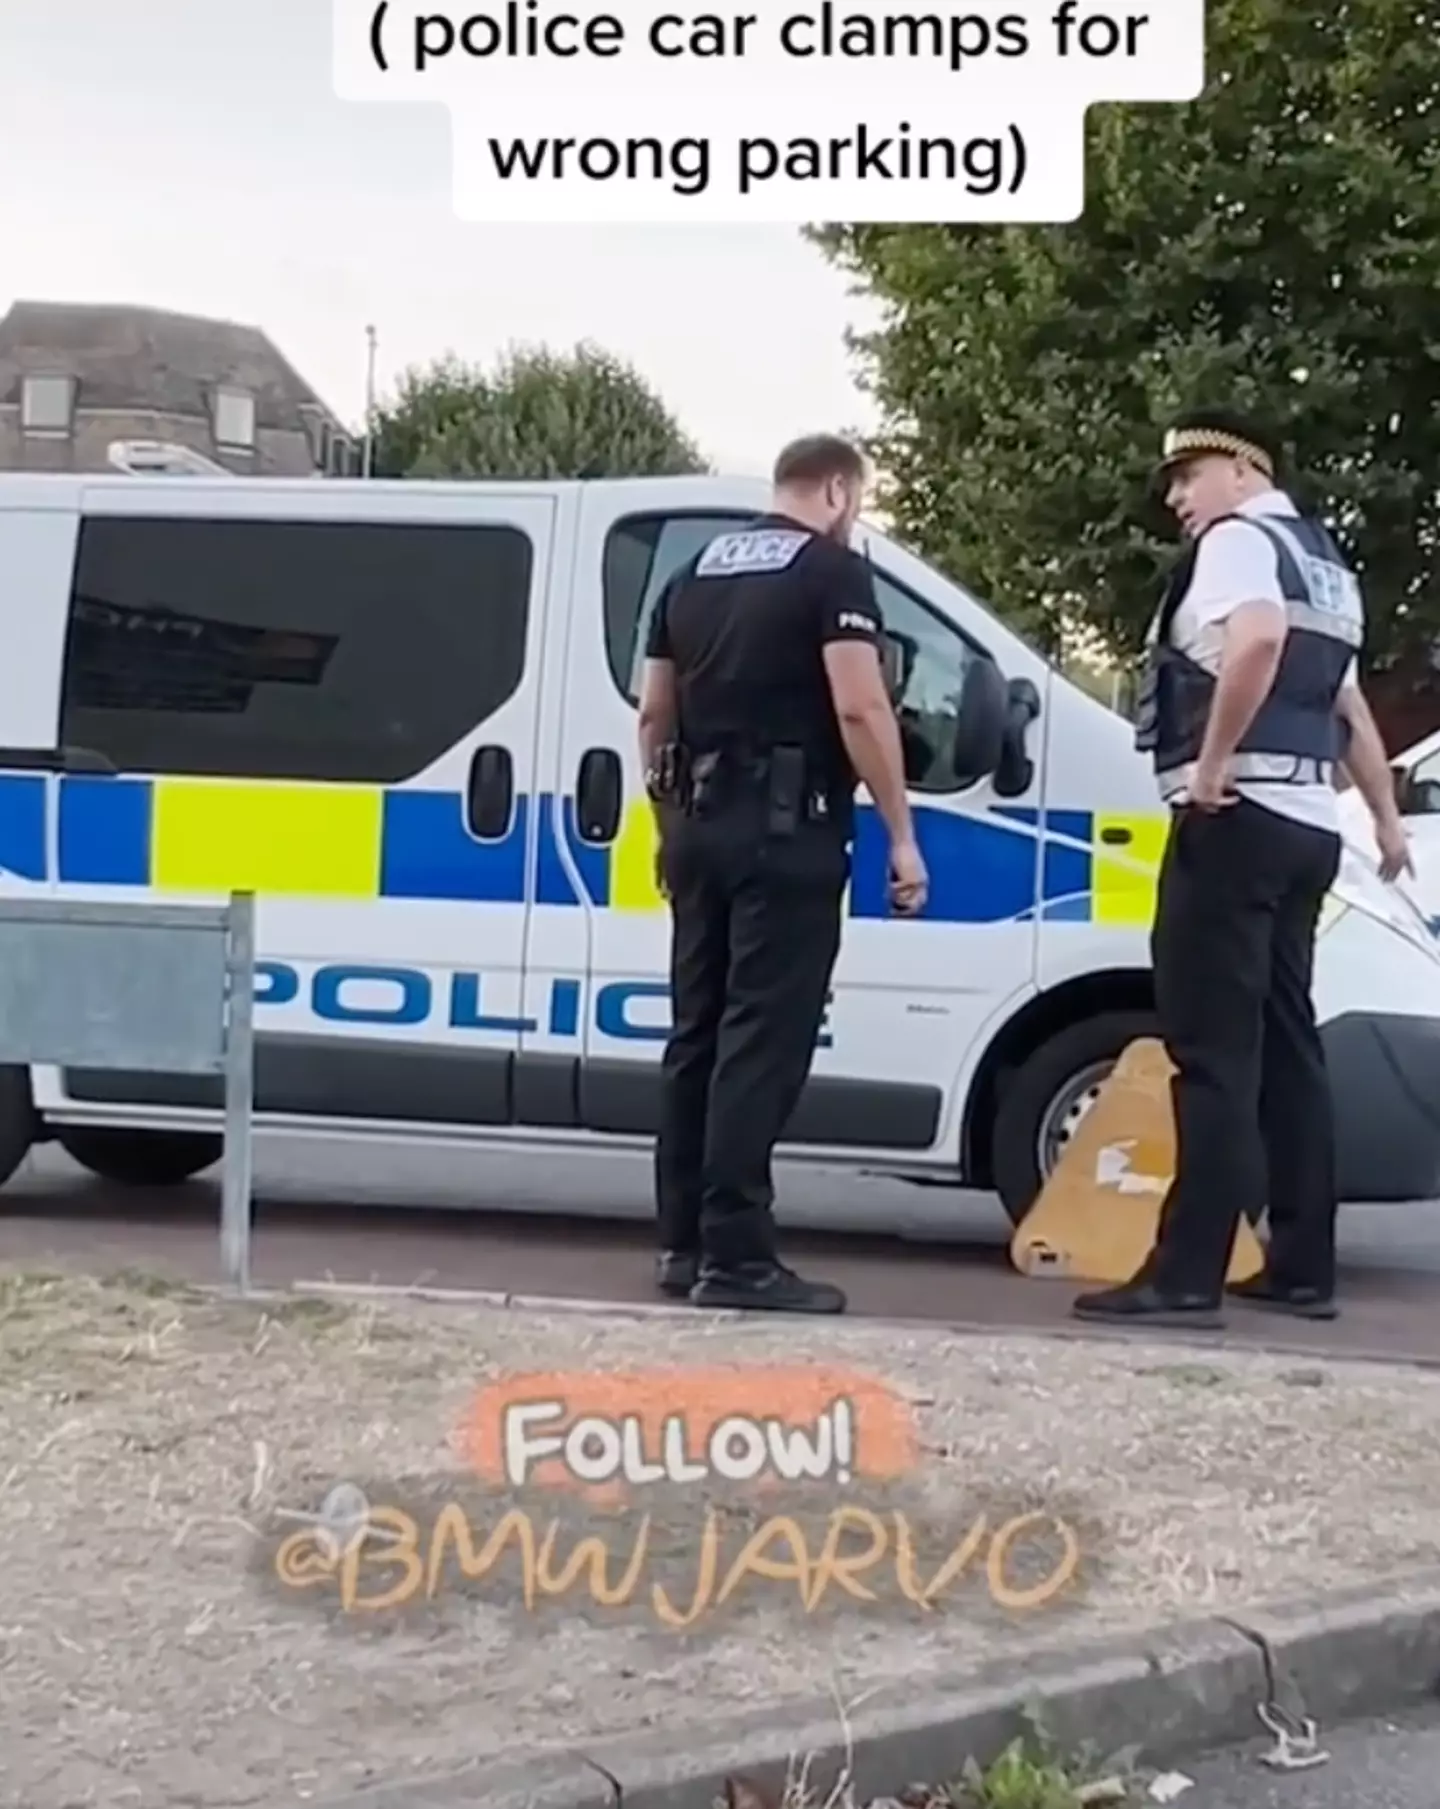 Footage of a traffic warden getting into it with a police officer for parking on a double yellow line has riled up the internet.